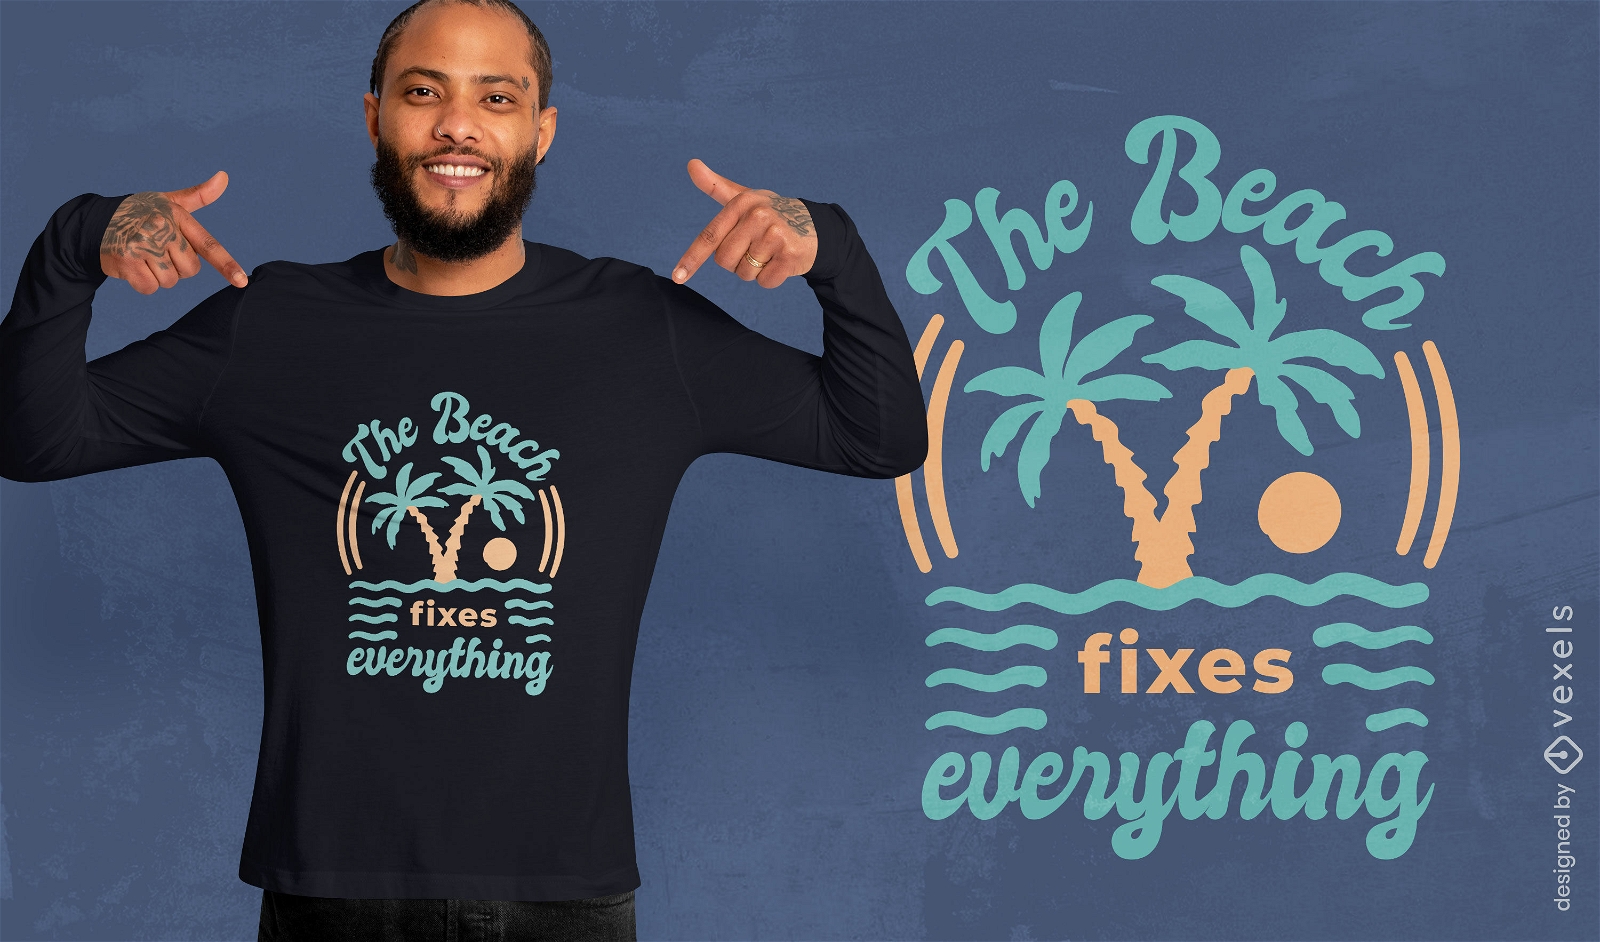 Beach therapy t-shirt design